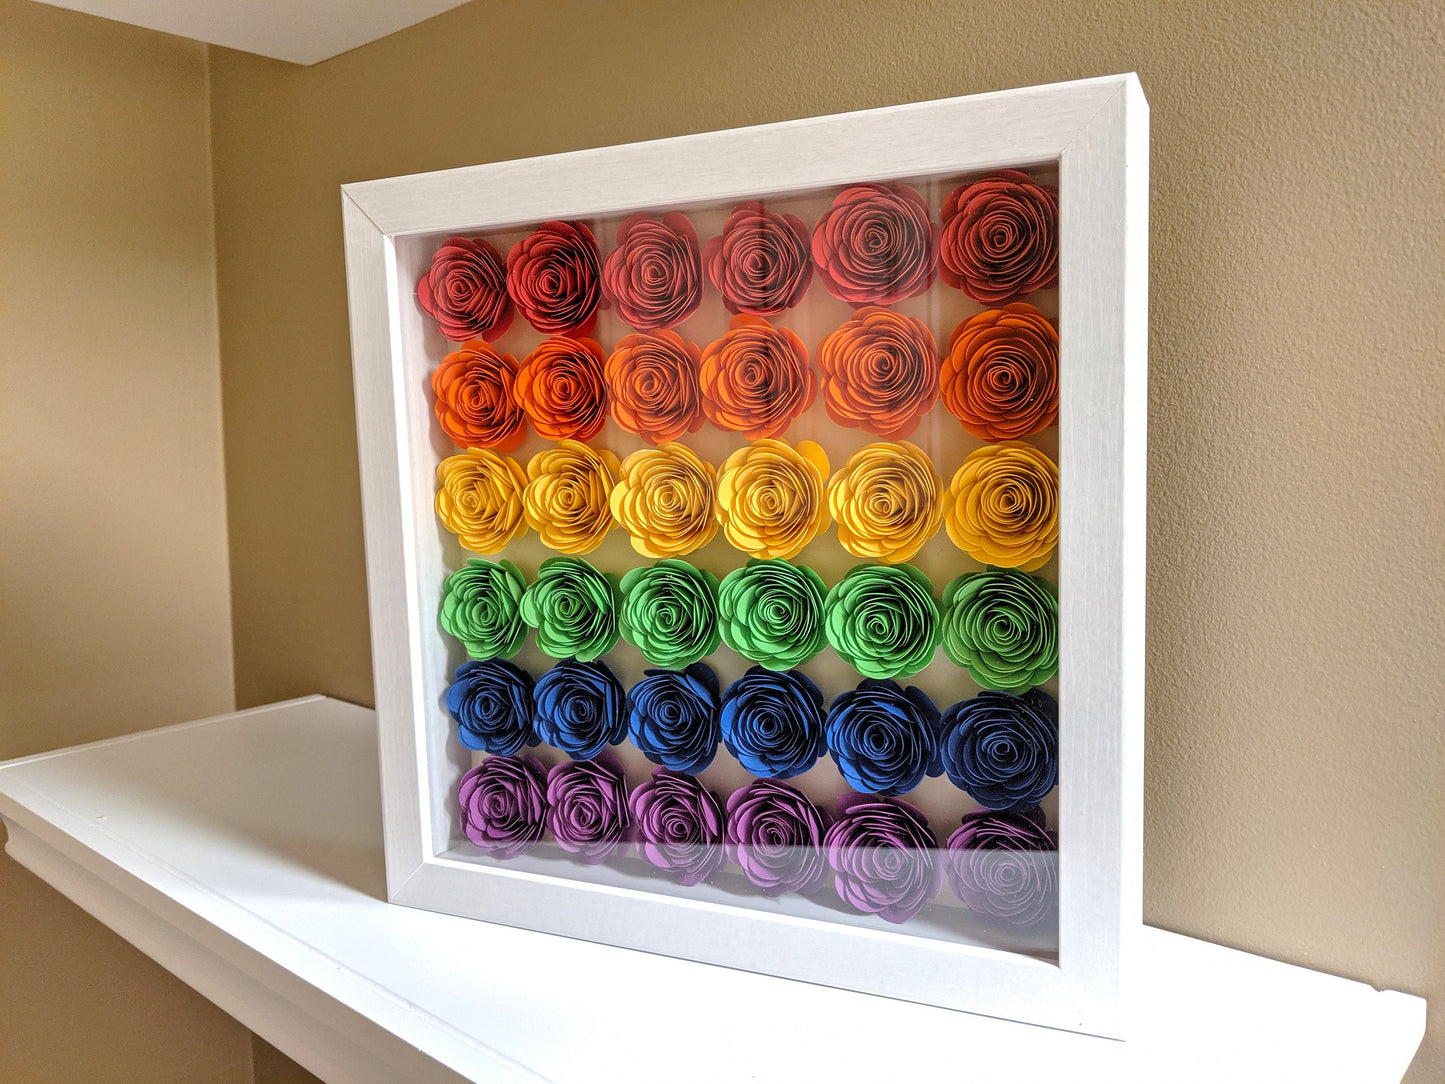 Rainbow baby rolled paper flower shadow box wall home decor